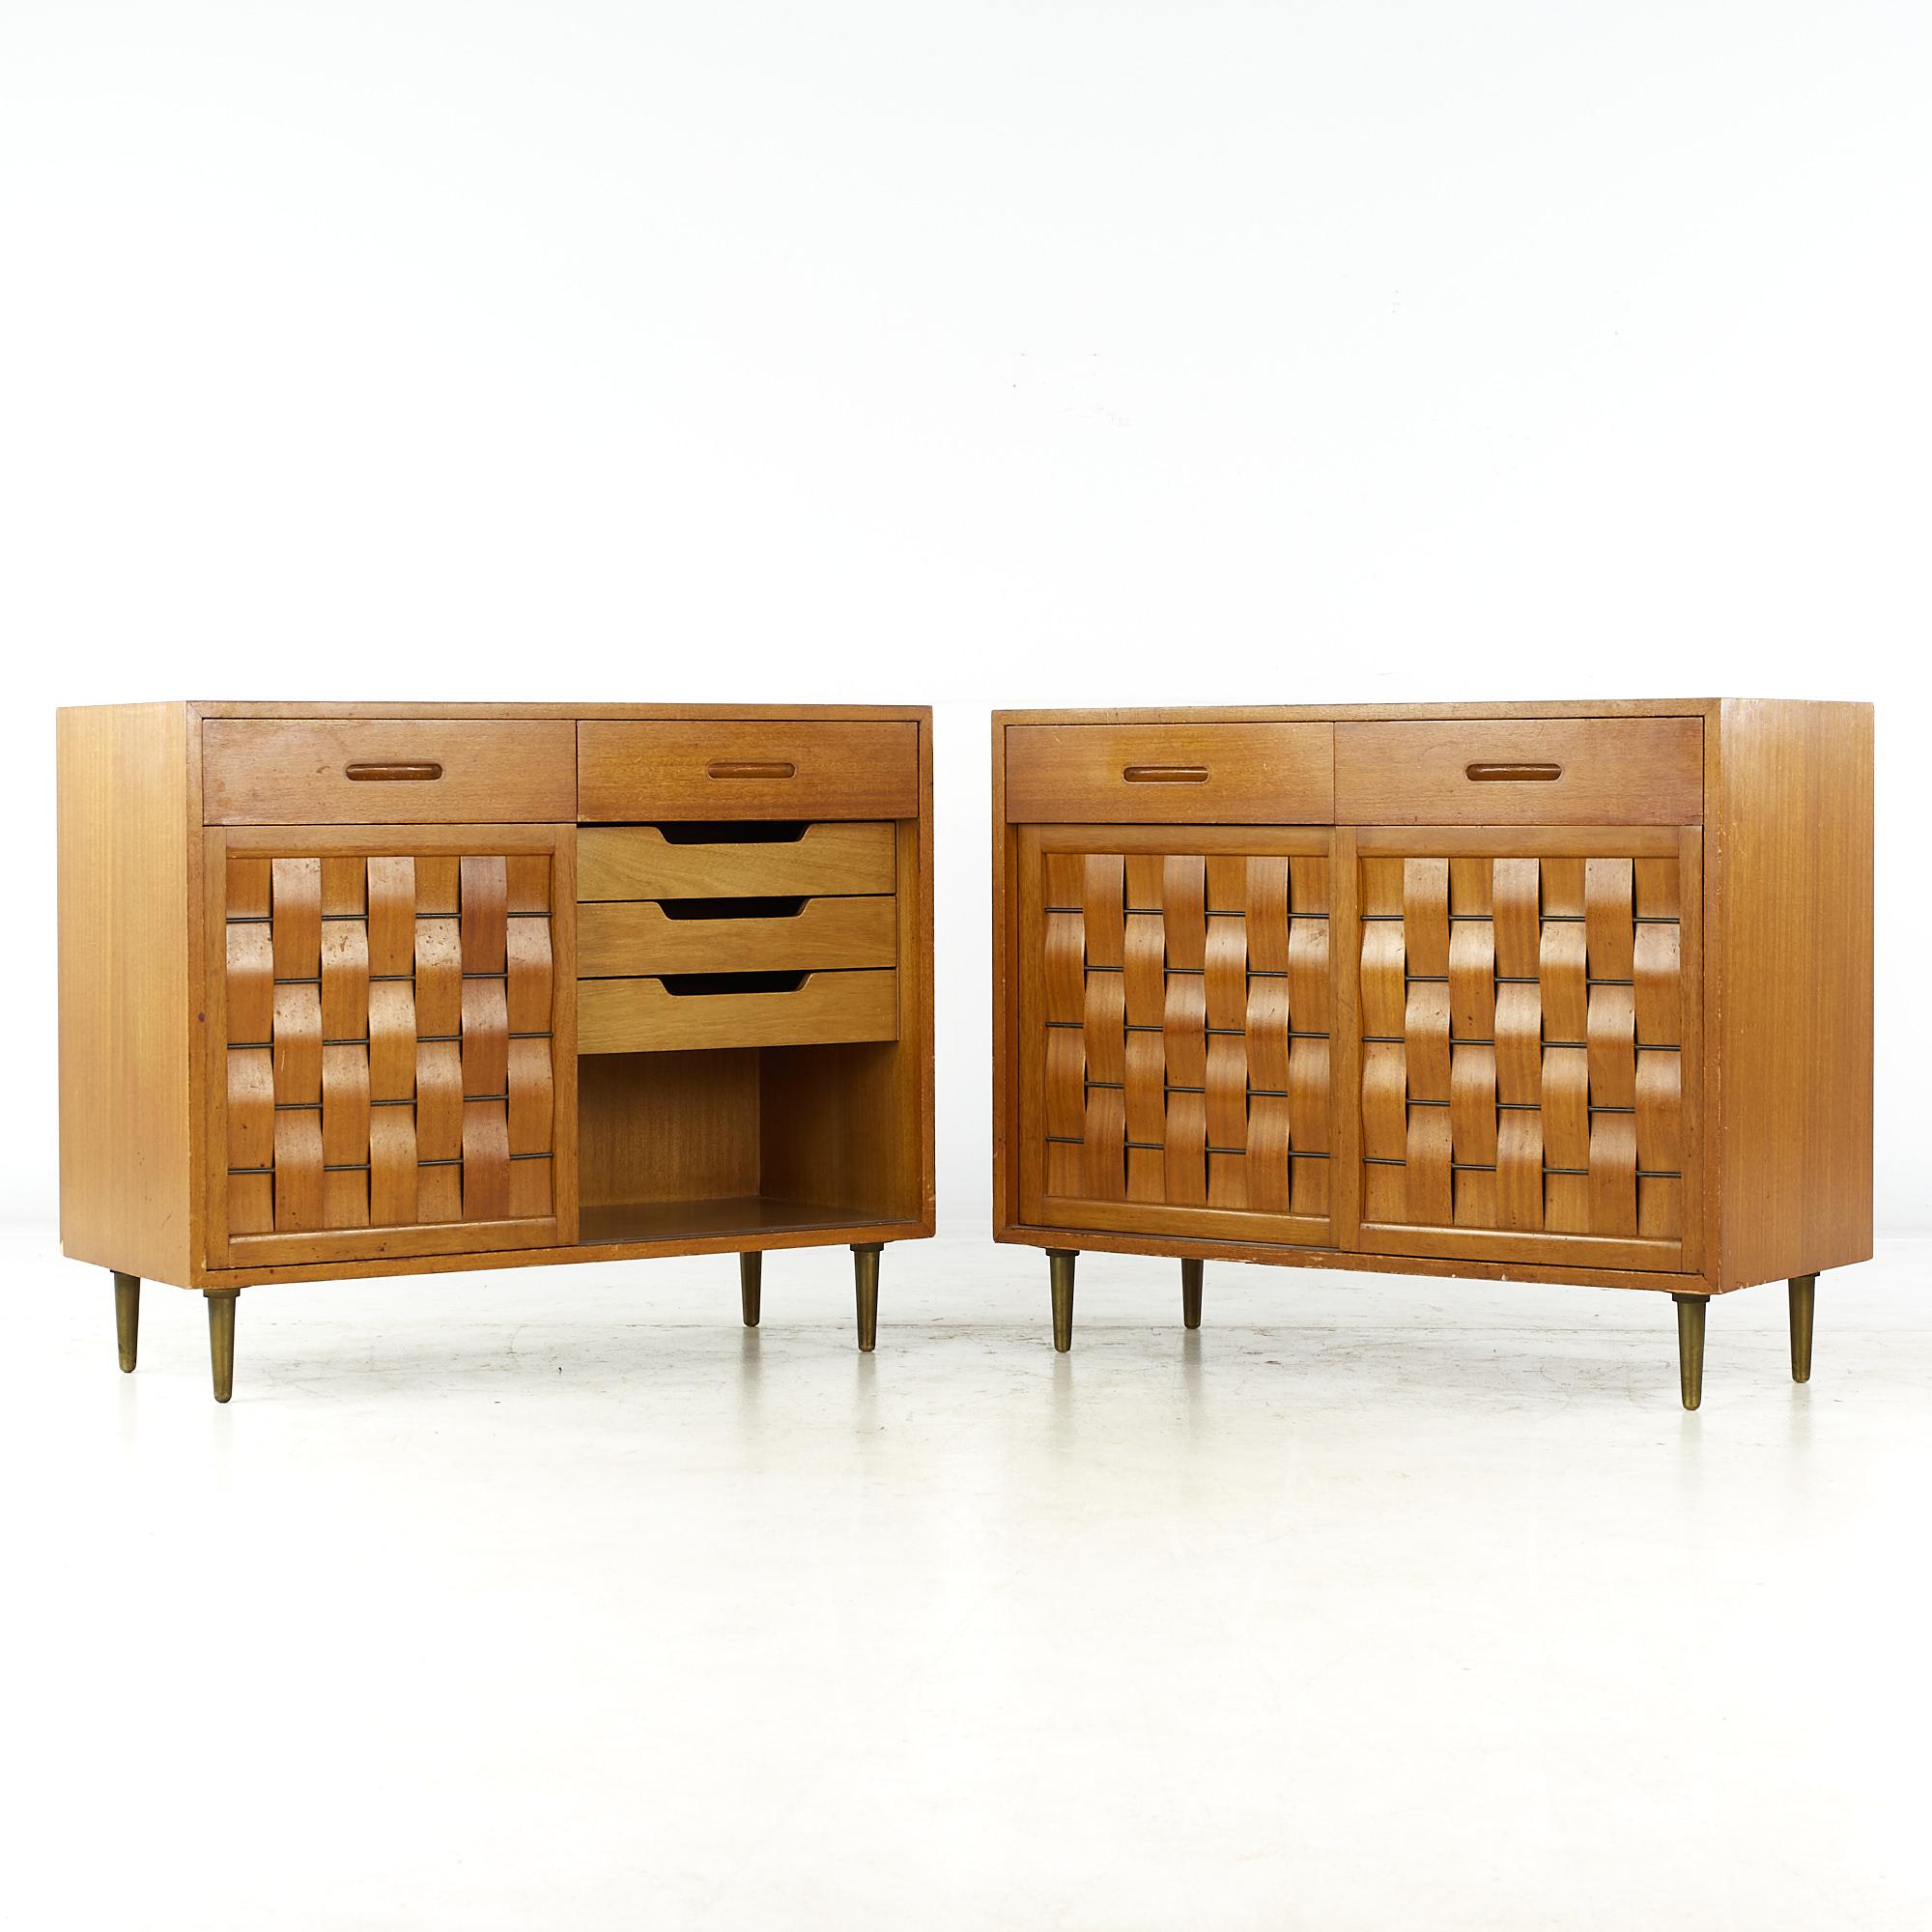 American Edward Wormley for Dunbar Mcm Bleached Mahogany Sliding Door Credenza, Pair For Sale